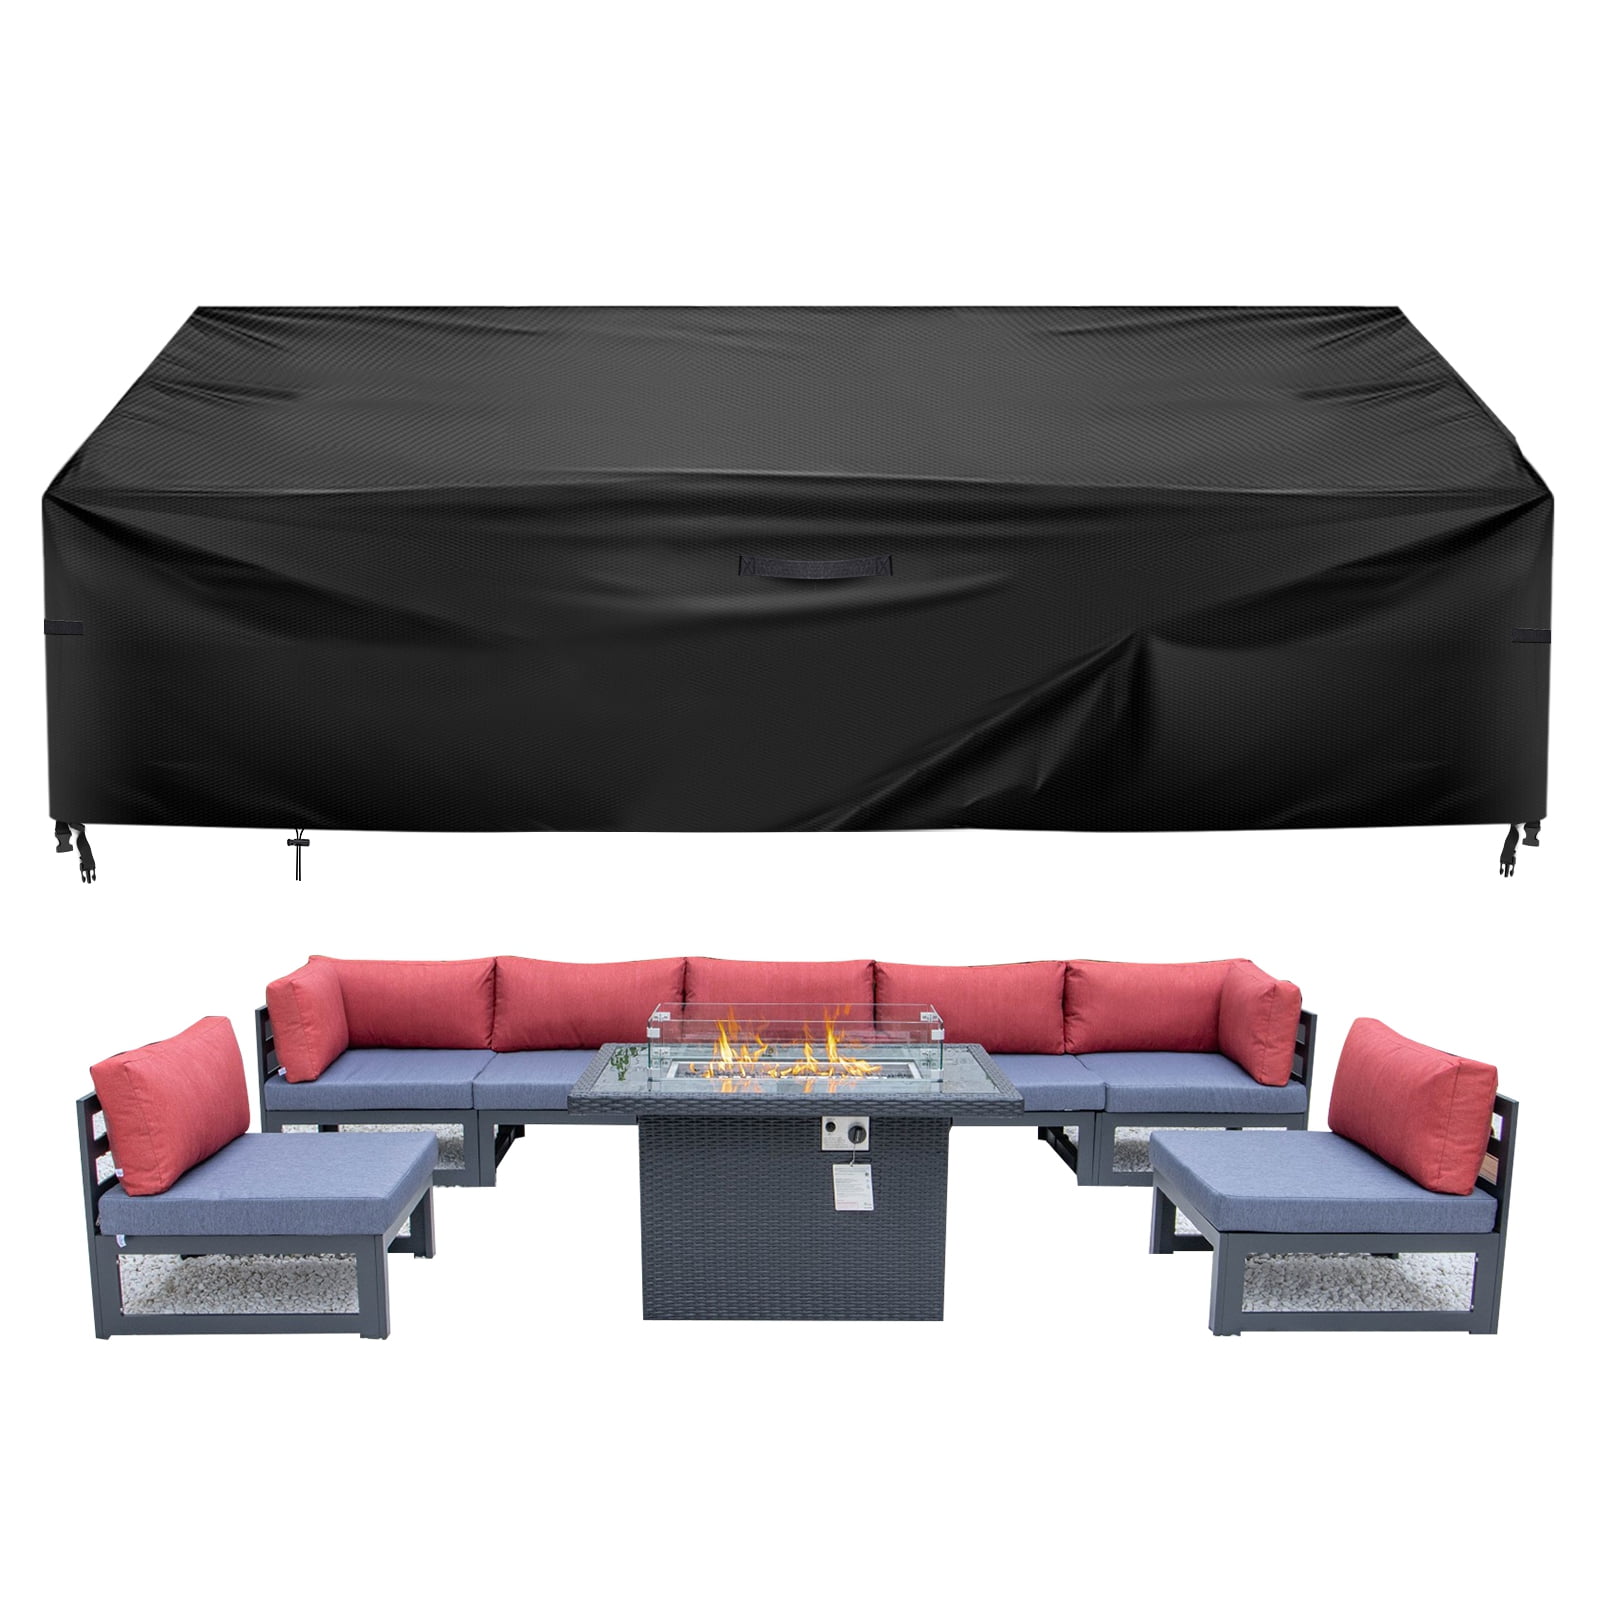 Outdoor Furniture Cover Patio Garden Large Love Seat Storage Cover Up to 65” L 